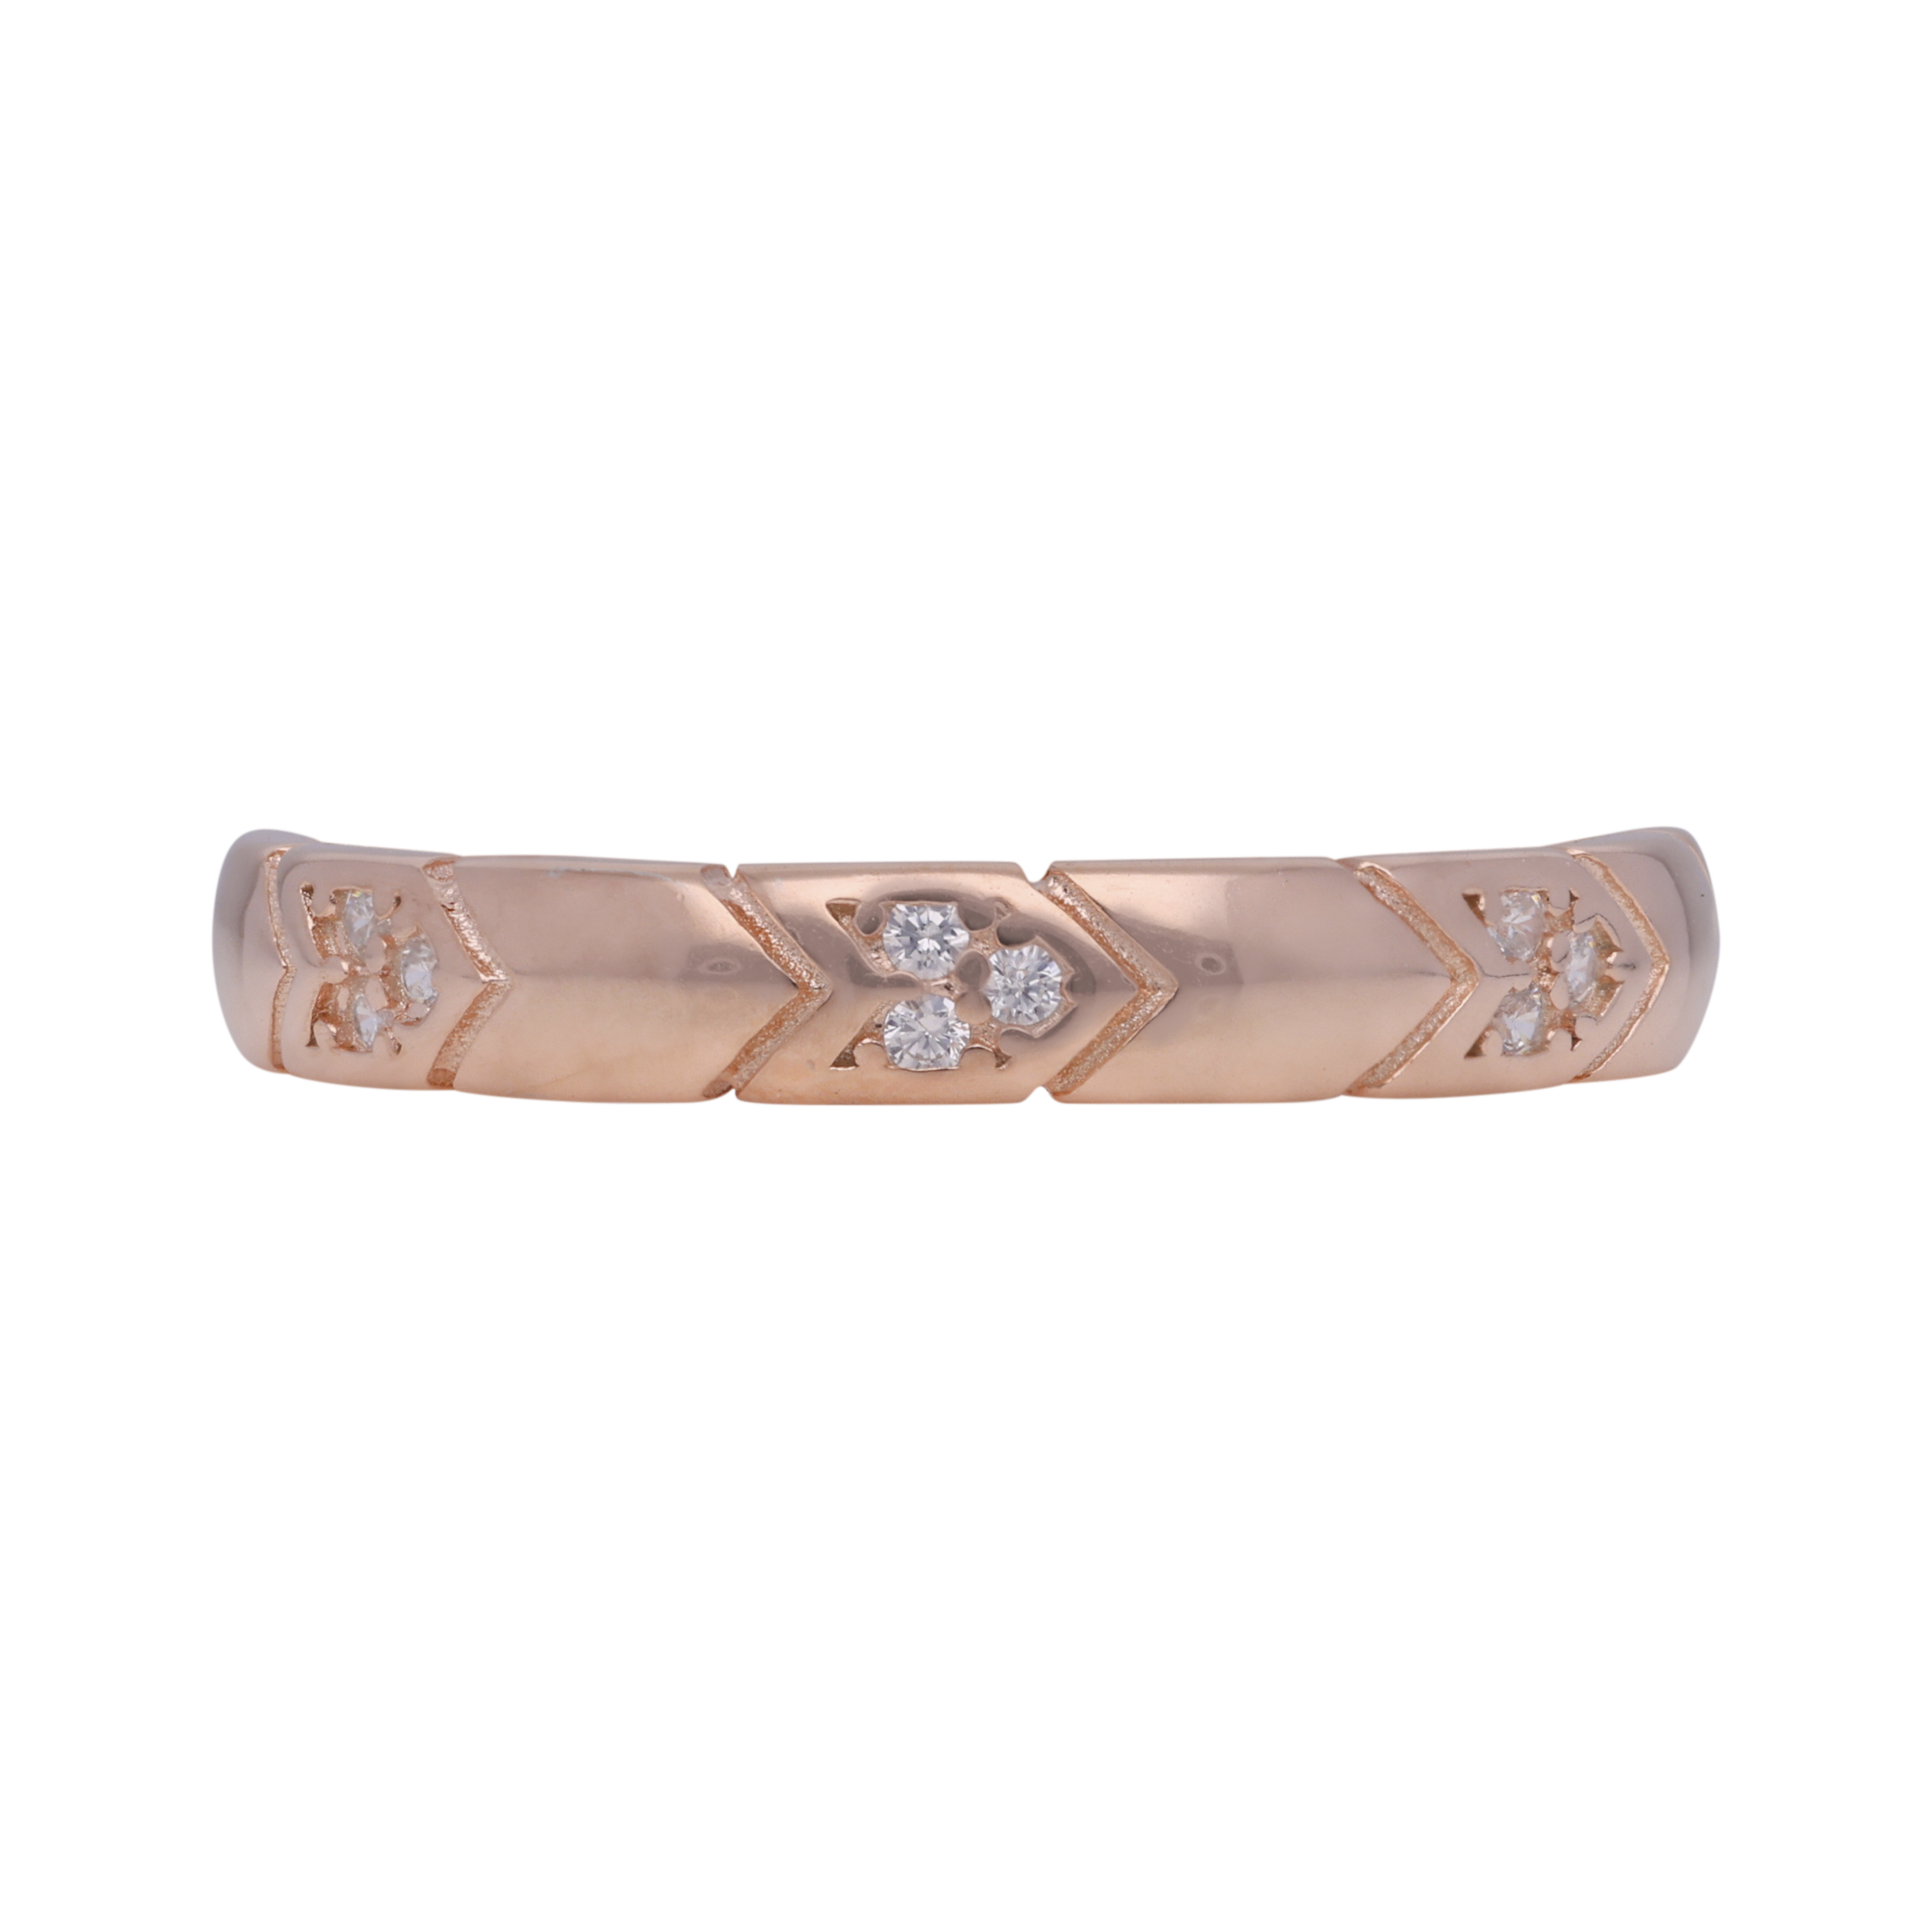 Radiant Glow: Sterling Silver Band Ring with Cubic Zirconia Sparkle | SKU : 0019883830, 0019883885, 0019883878